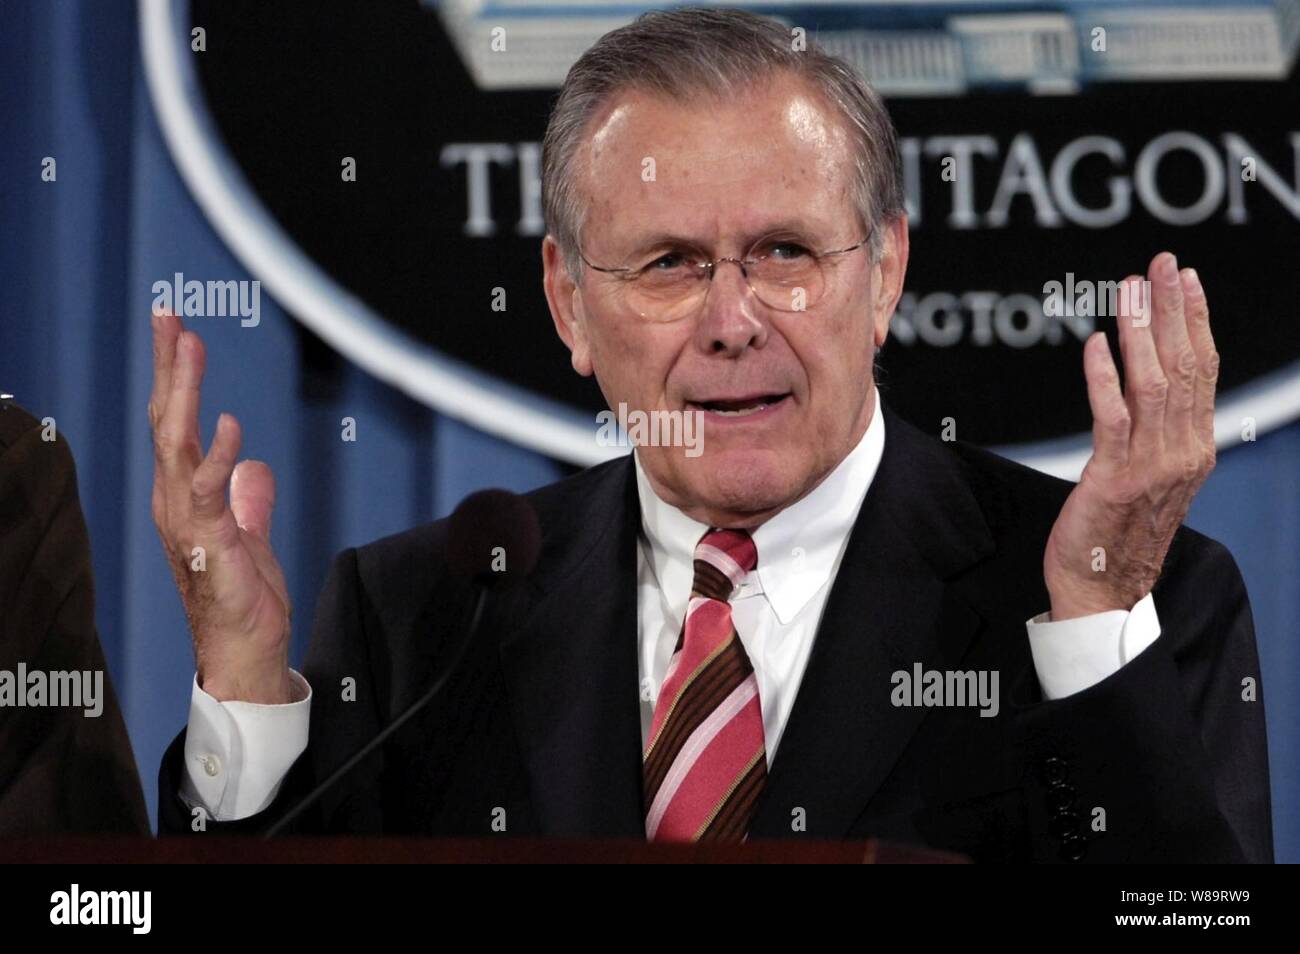 Secretary of Defense Donald H. Rumsfeld talks to reporters during a Pentagon press briefing in Arlington, Va., on March 28, 2006.  Rumsfeld spoke of his trip to the crash site of United Flight 93 on Sept. 11, 2001, in Shanksville, Pa., in his opening remarks before taking questions from reporters with Chairman of the Joint Chiefs of Staff Gen. Peter Pace, U.S. Marine Corps. Stock Photo